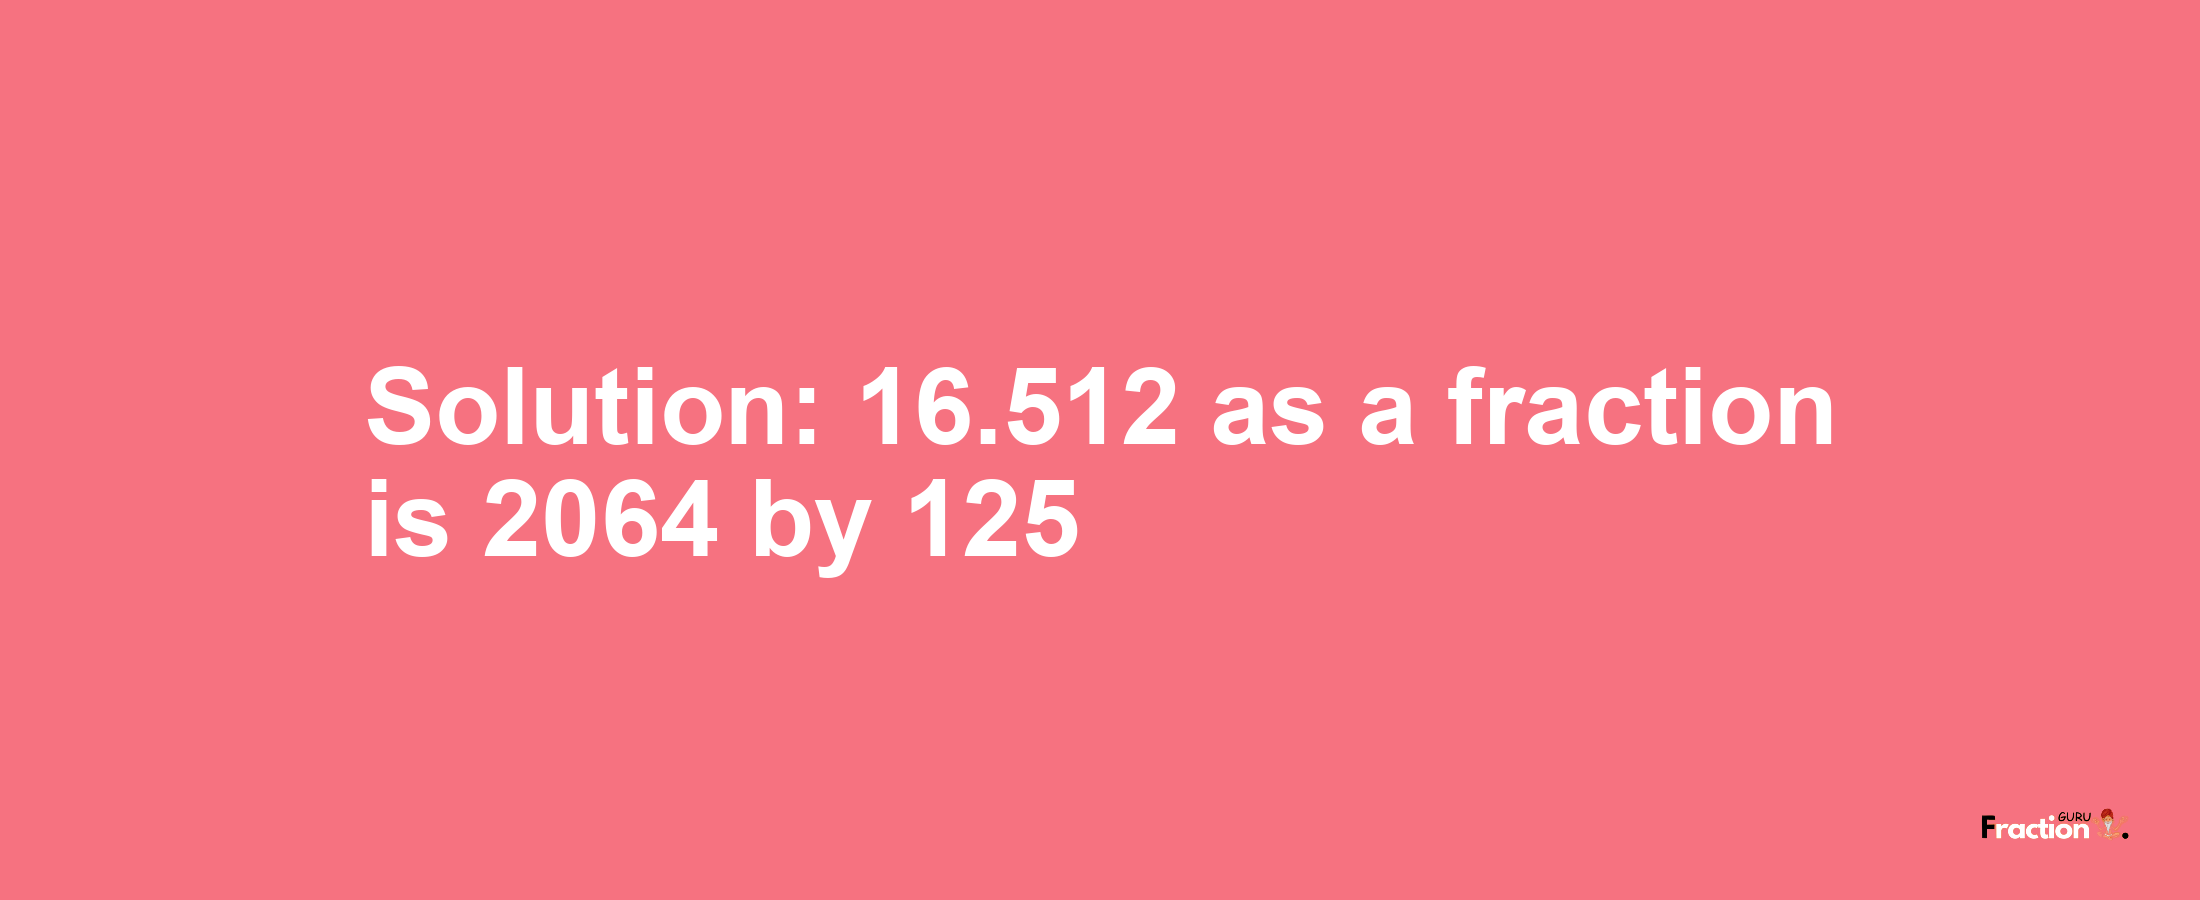 Solution:16.512 as a fraction is 2064/125